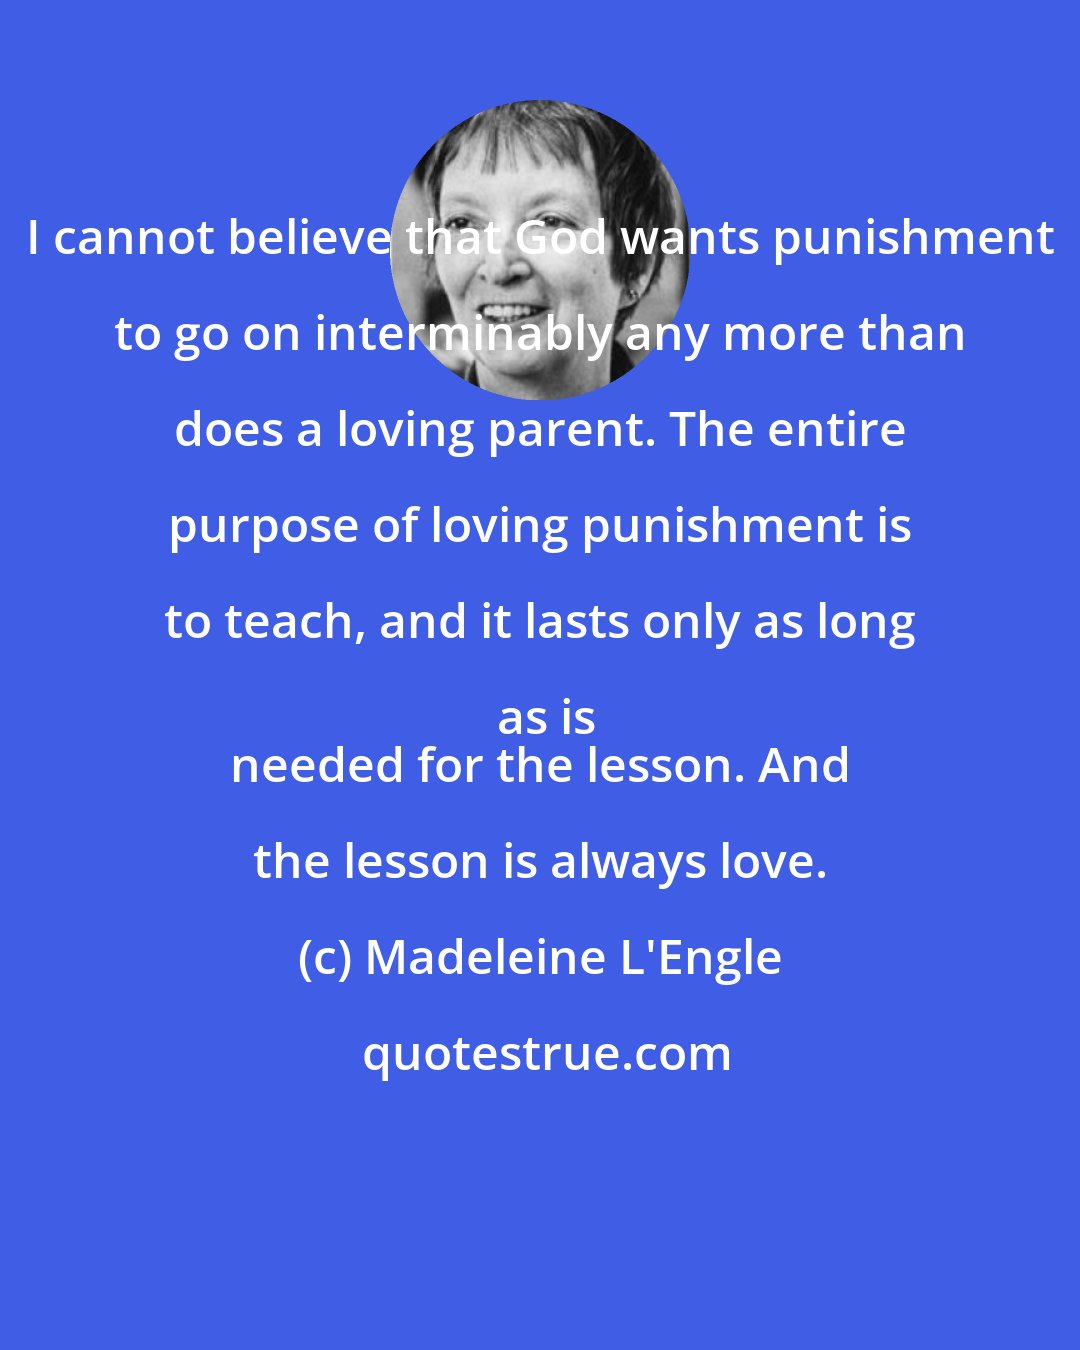 Madeleine L'Engle: I cannot believe that God wants punishment to go on interminably any more than does a loving parent. The entire purpose of loving punishment is to teach, and it lasts only as long as is
 needed for the lesson. And the lesson is always love.